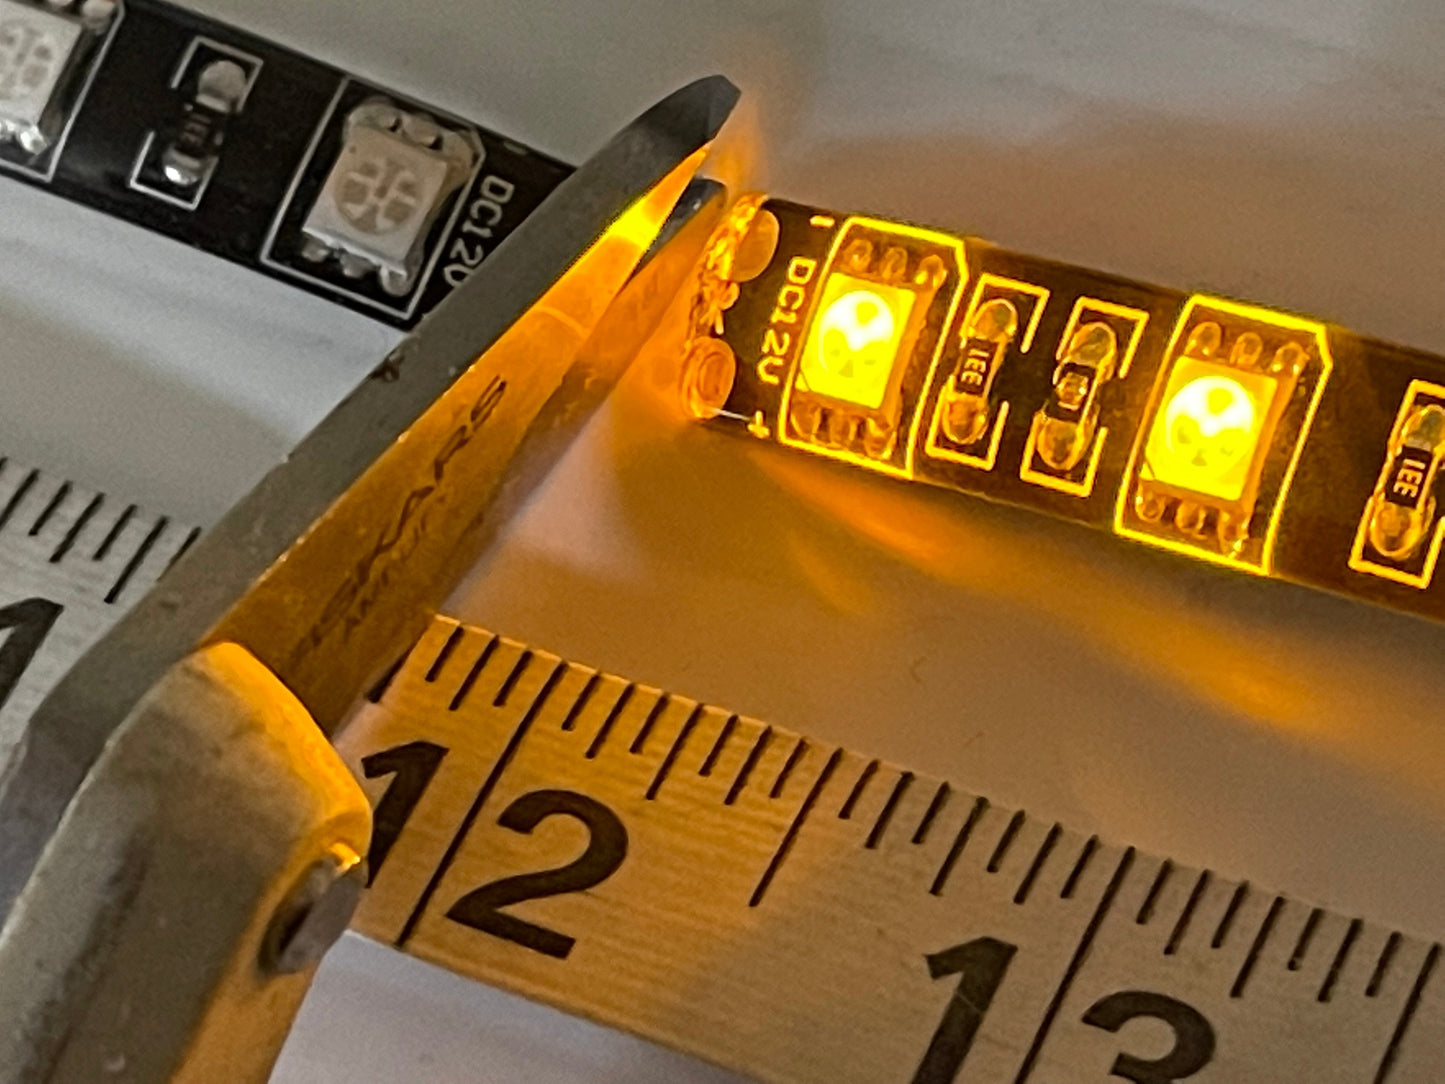 4 LED strips into 1 Battery 9V Connector - Steady On - Cuttable Project Cosplay Lights